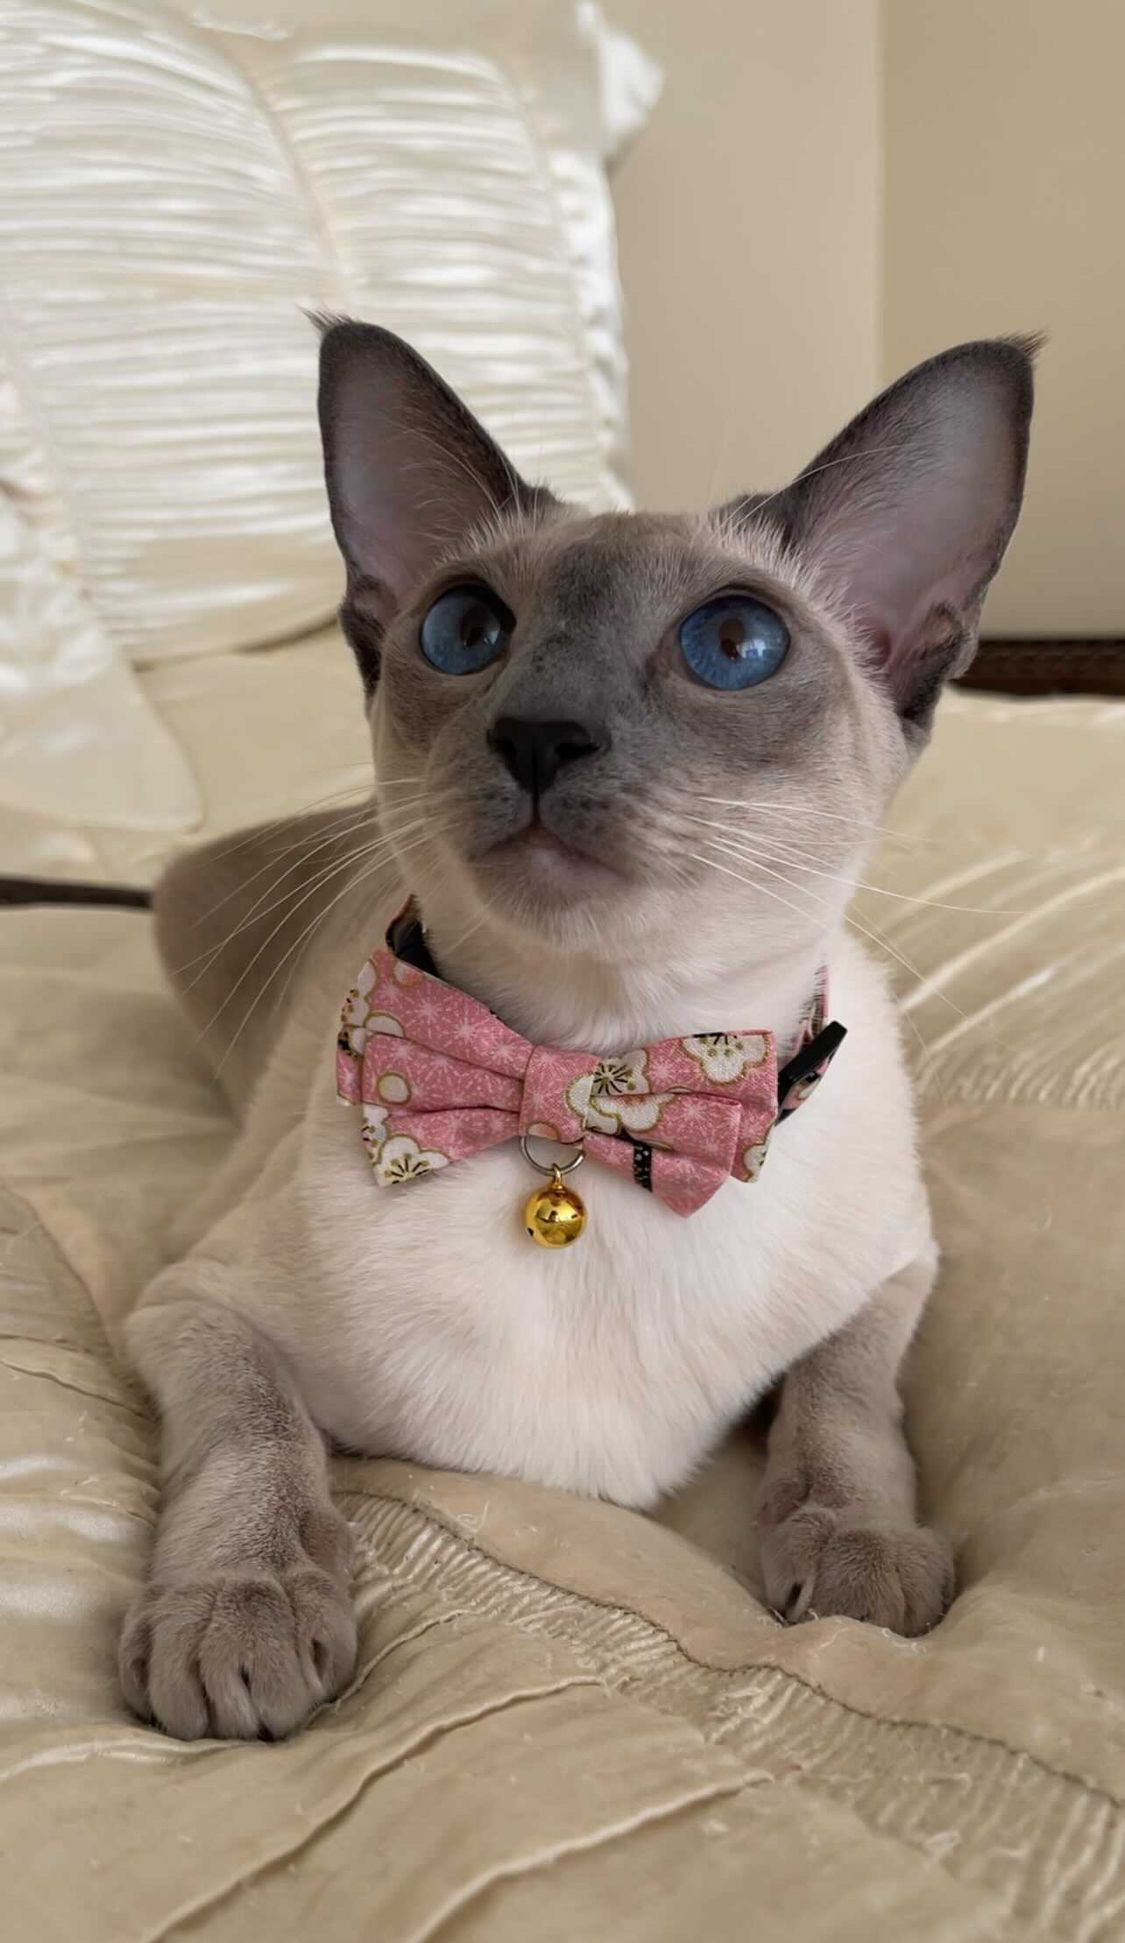 Cat Collars – Yes or No?